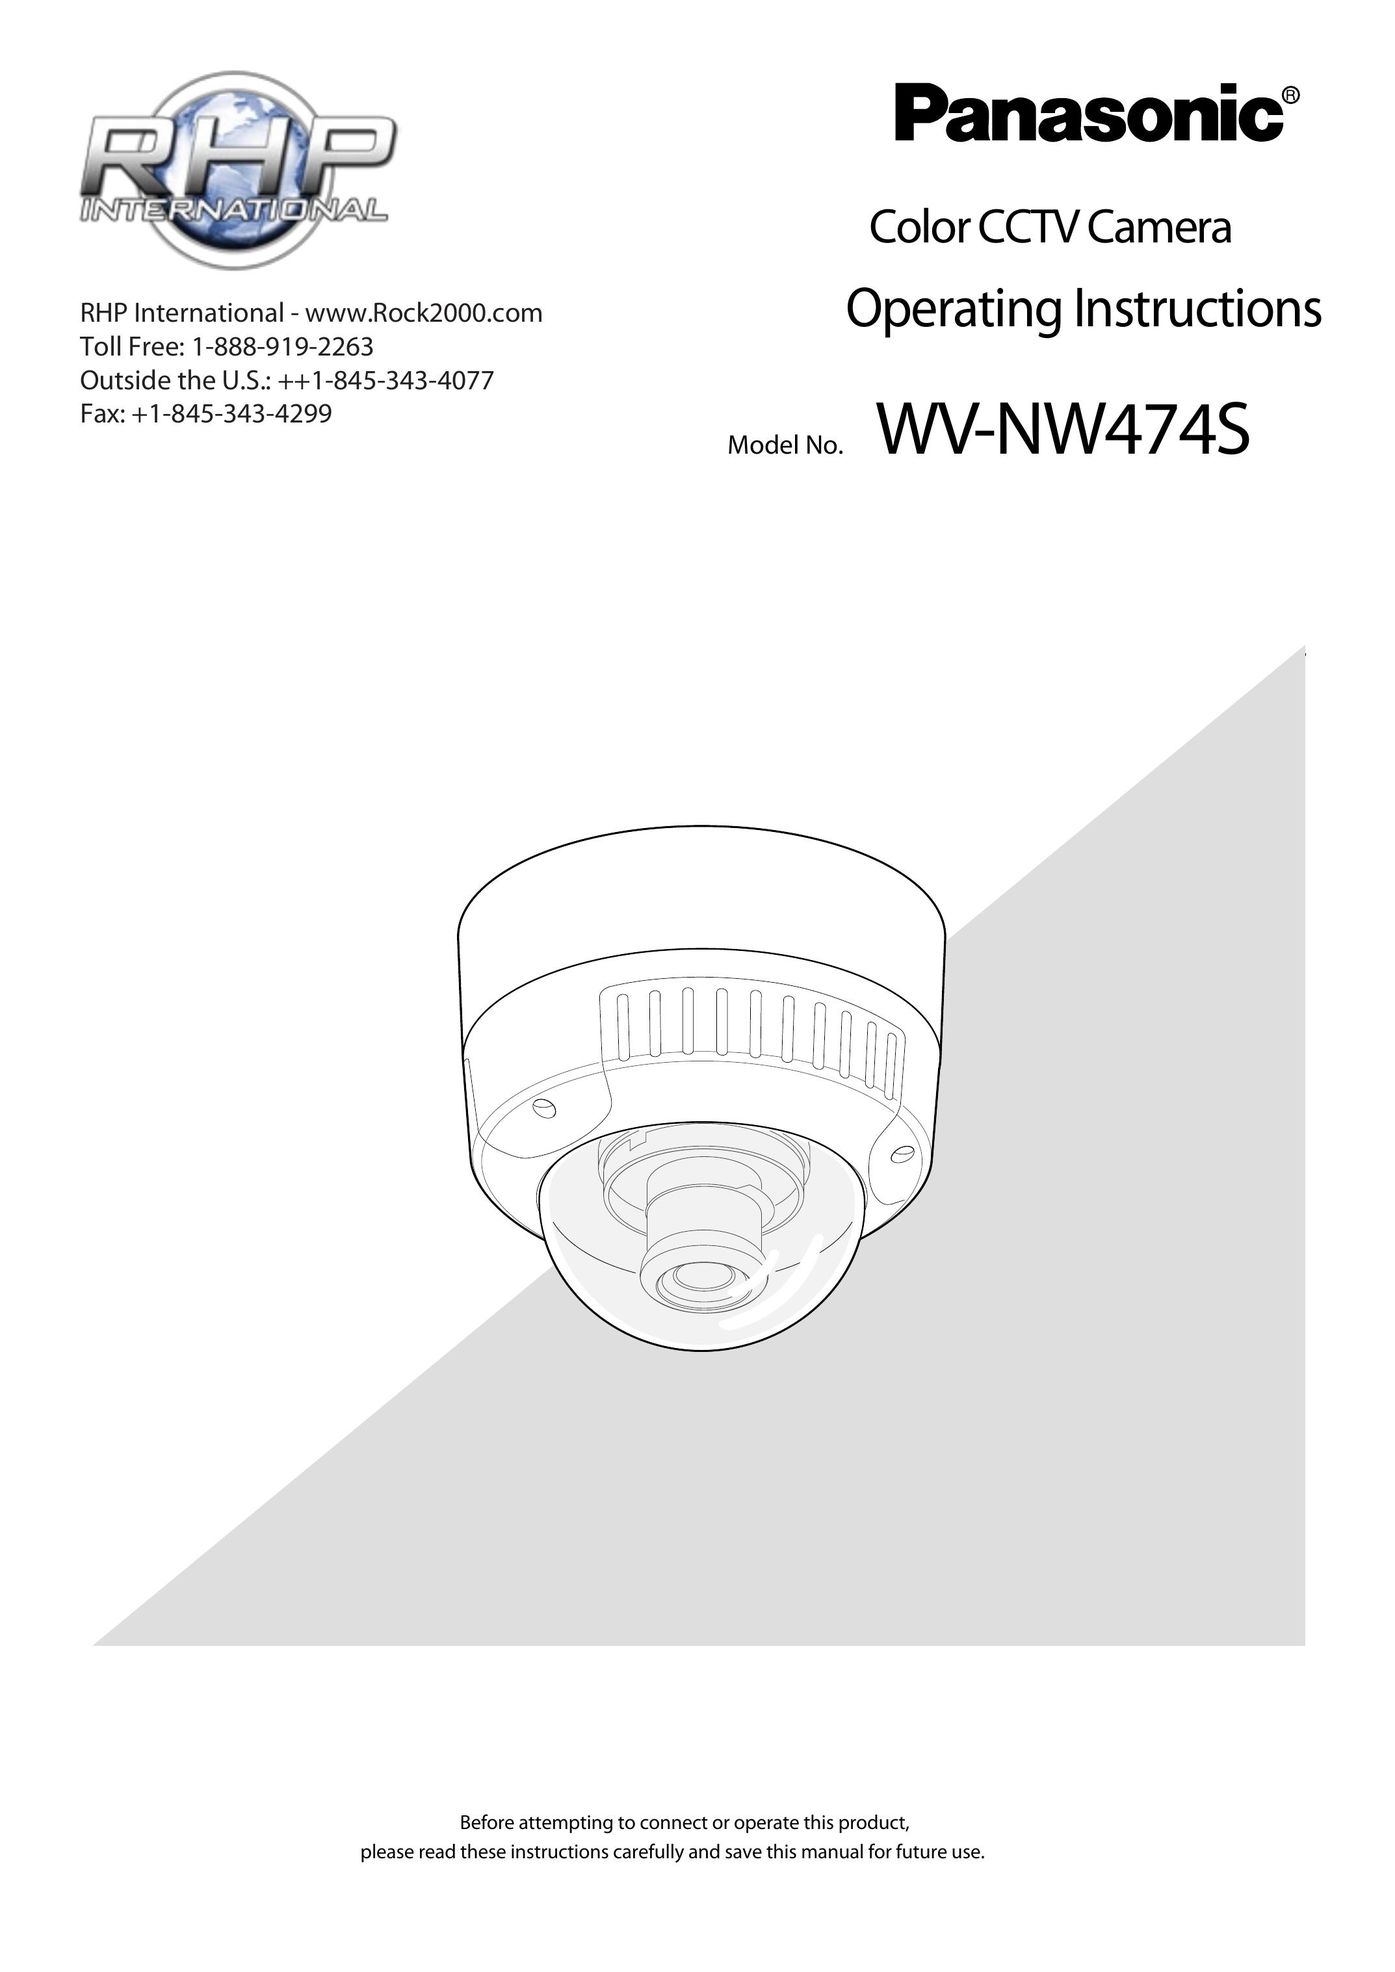 Pantech WV-NW474S Home Security System User Manual